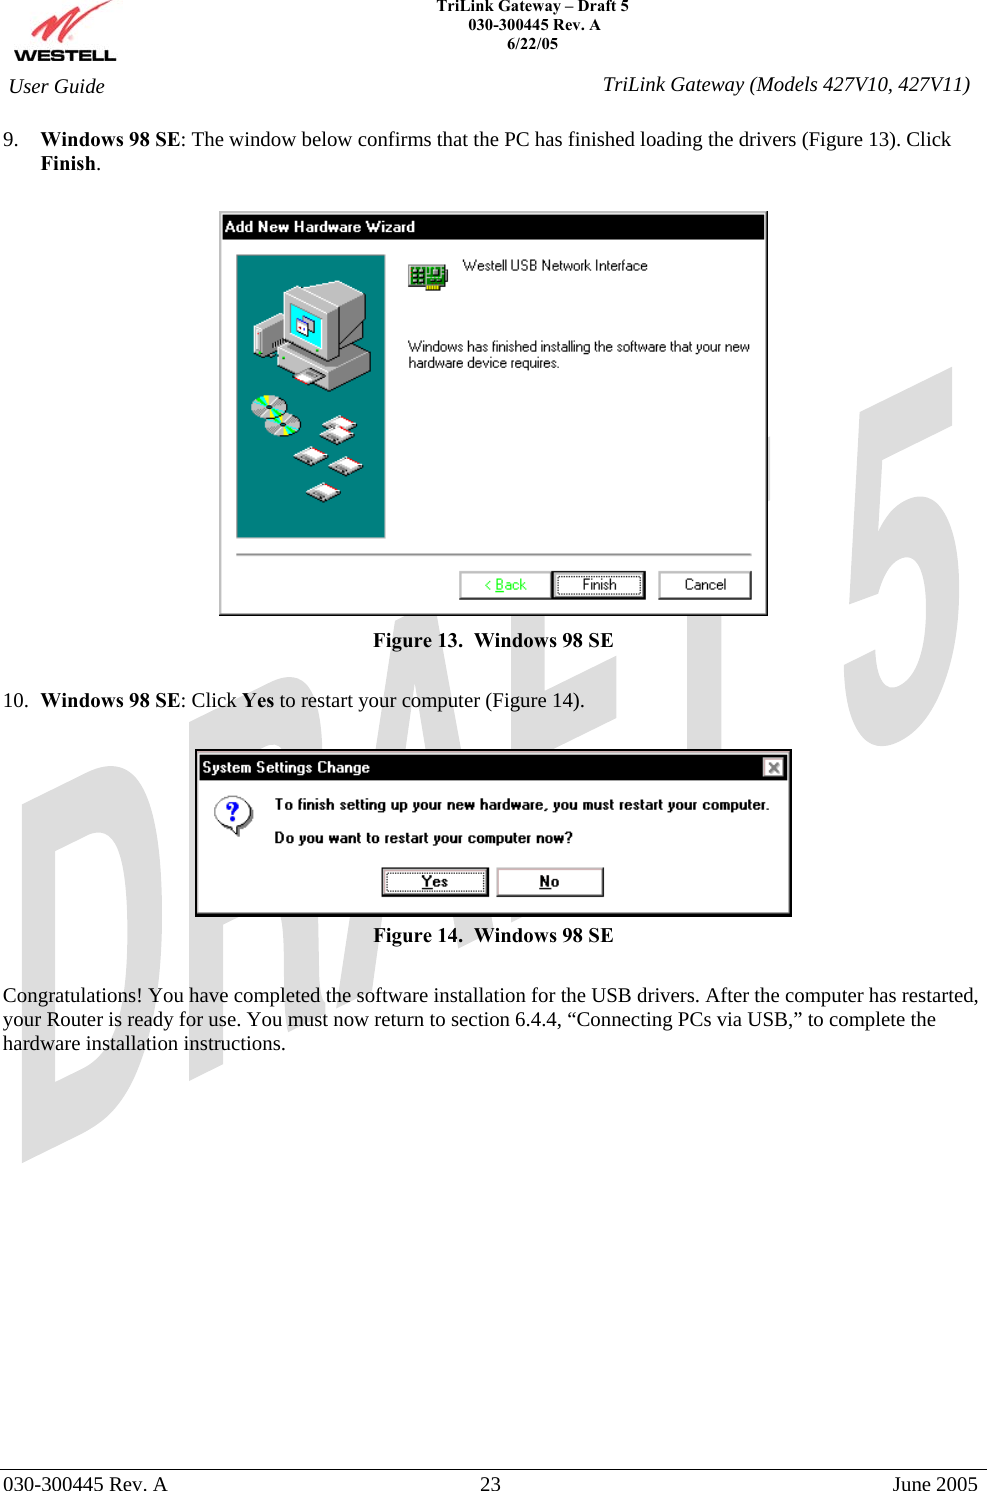    TriLink Gateway – Draft 5   030-300445 Rev. A 6/22/05   030-300445 Rev. A  23  June 2005  User Guide  TriLink Gateway (Models 427V10, 427V11)9.  Windows 98 SE: The window below confirms that the PC has finished loading the drivers (Figure 13). Click Finish.   Figure 13.  Windows 98 SE  10.  Windows 98 SE: Click Yes to restart your computer (Figure 14).   Figure 14.  Windows 98 SE  Congratulations! You have completed the software installation for the USB drivers. After the computer has restarted, your Router is ready for use. You must now return to section 6.4.4, “Connecting PCs via USB,” to complete the hardware installation instructions.                  